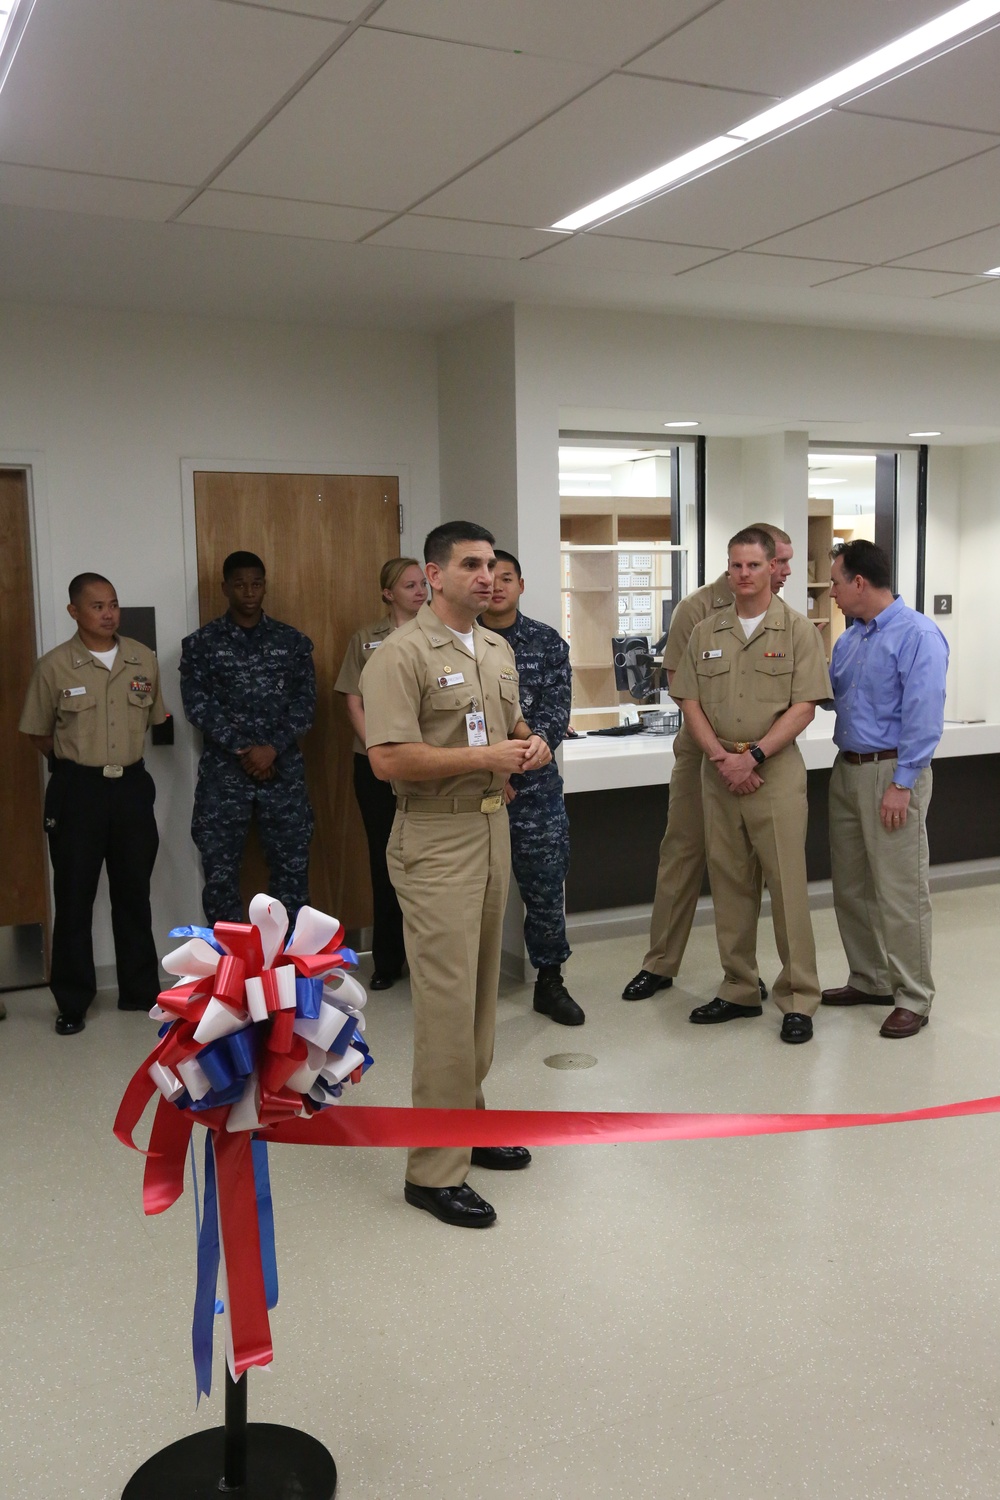 Hospital pharmacy renovation complete, open for business